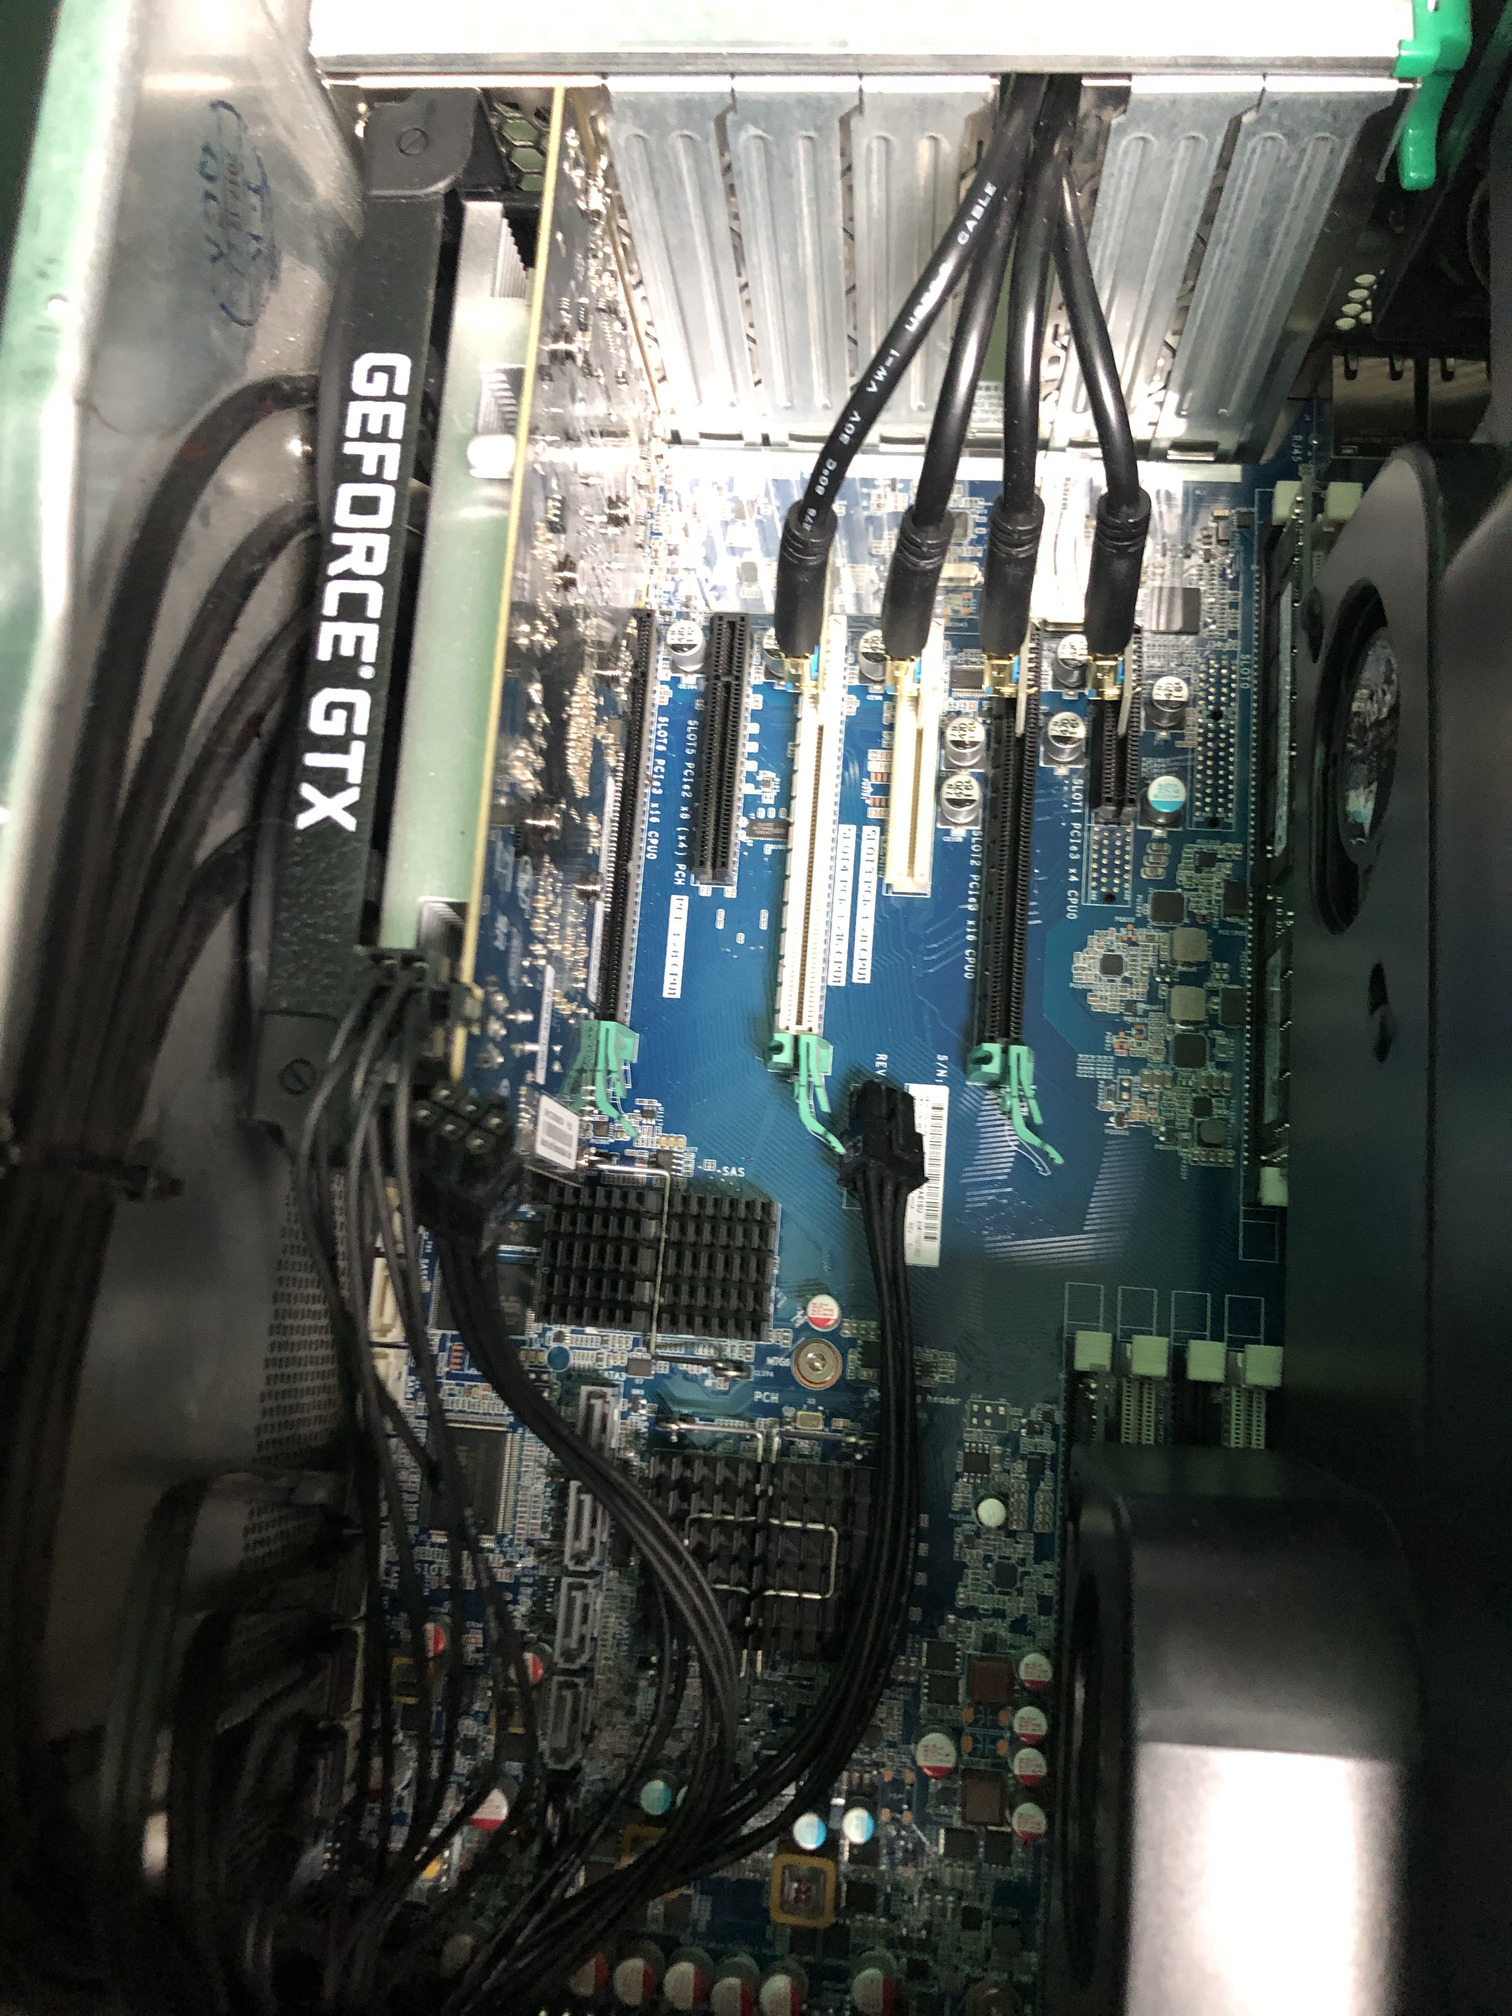 Figure 5. Inside view of the server where the PCI-E connections are made